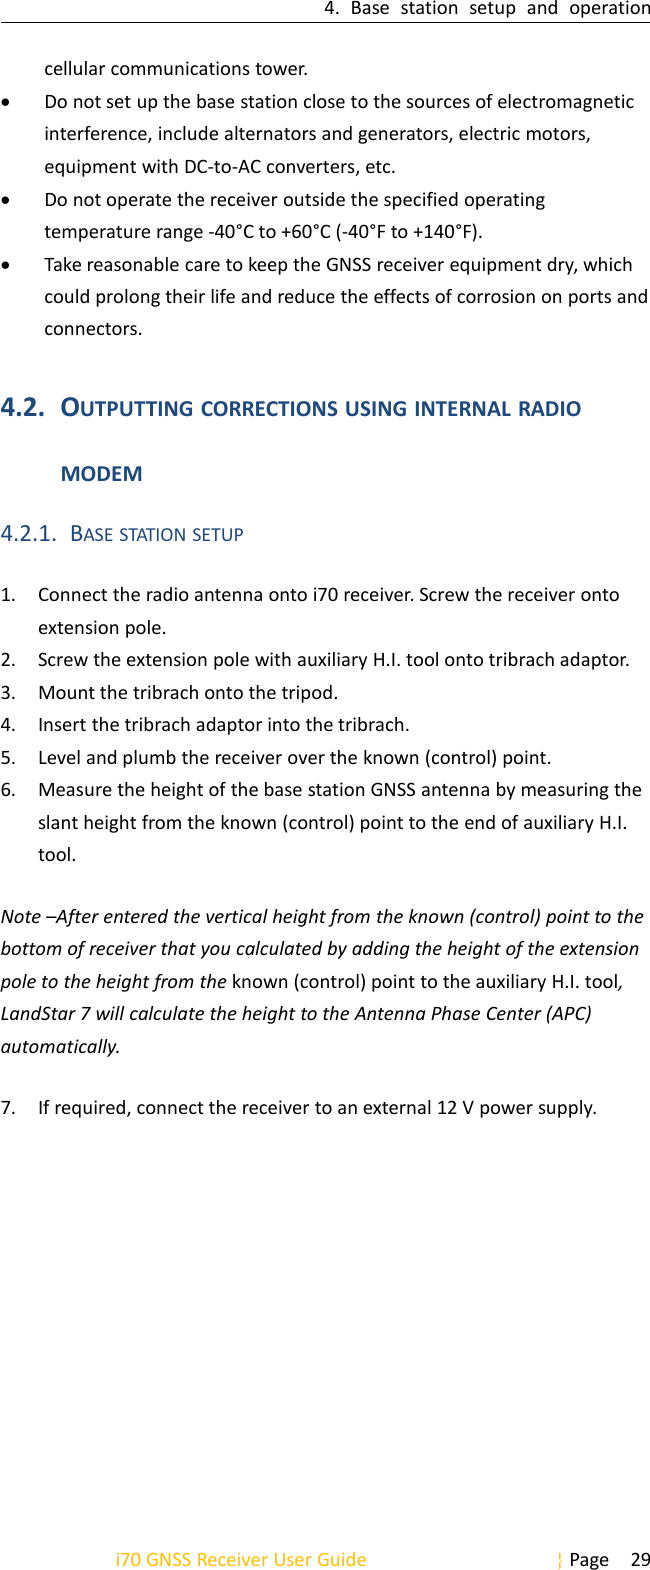 4. Base station setup and operationi70 GNSS Receiver User Guide Page 29cellular communications tower.Do not set up the base station close to the sources of electromagneticinterference, include alternators and generators, electric motors,equipment with DC-to-AC converters, etc.Do not operate the receiver outside the specified operatingtemperature range -40°C to +60°C (-40°F to +140°F).Take reasonable care to keep the GNSS receiver equipment dry, whichcould prolong their life and reduce the effects of corrosion on ports andconnectors.4.2. OUTPUTTING CORRECTIONS USING INTERNAL RADIOMODEM4.2.1. BASE STATION SETUP1. Connect the radio antenna onto i70 receiver. Screw the receiver ontoextension pole.2. Screw the extension pole with auxiliary H.I. tool onto tribrach adaptor.3. Mount the tribrach onto the tripod.4. Insert the tribrach adaptor into the tribrach.5. Level and plumb the receiver over the known (control) point.6. Measure the height of the base station GNSS antenna by measuring theslant height from the known (control) point to the end of auxiliary H.I.tool.Note –After entered the vertical height from the known (control) point to thebottom of receiver that you calculated by adding the height of the extensionpole to the height from the known (control) point to the auxiliary H.I. tool,LandStar 7 will calculate the height to the Antenna Phase Center (APC)automatically.7. If required, connect the receiver to an external 12 V power supply.